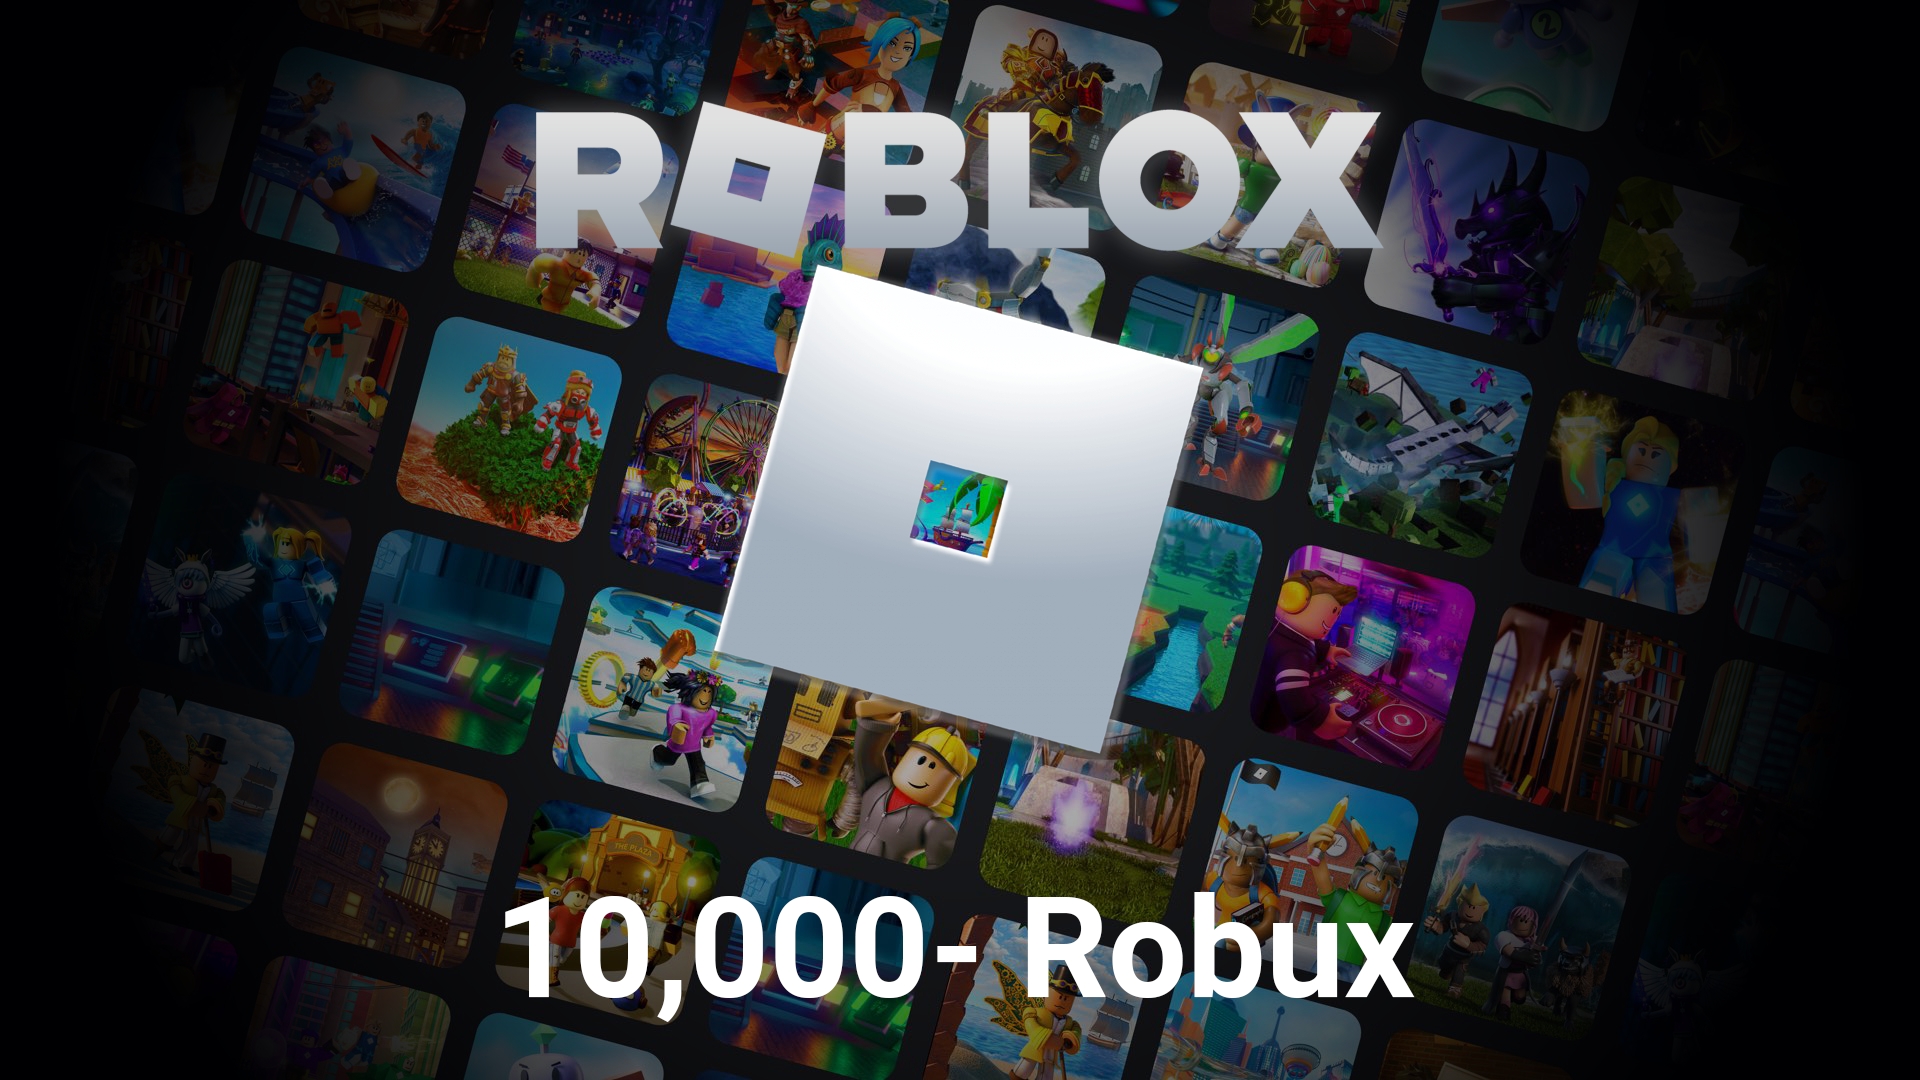 10000 robux - earn robux for Android - Free App Download